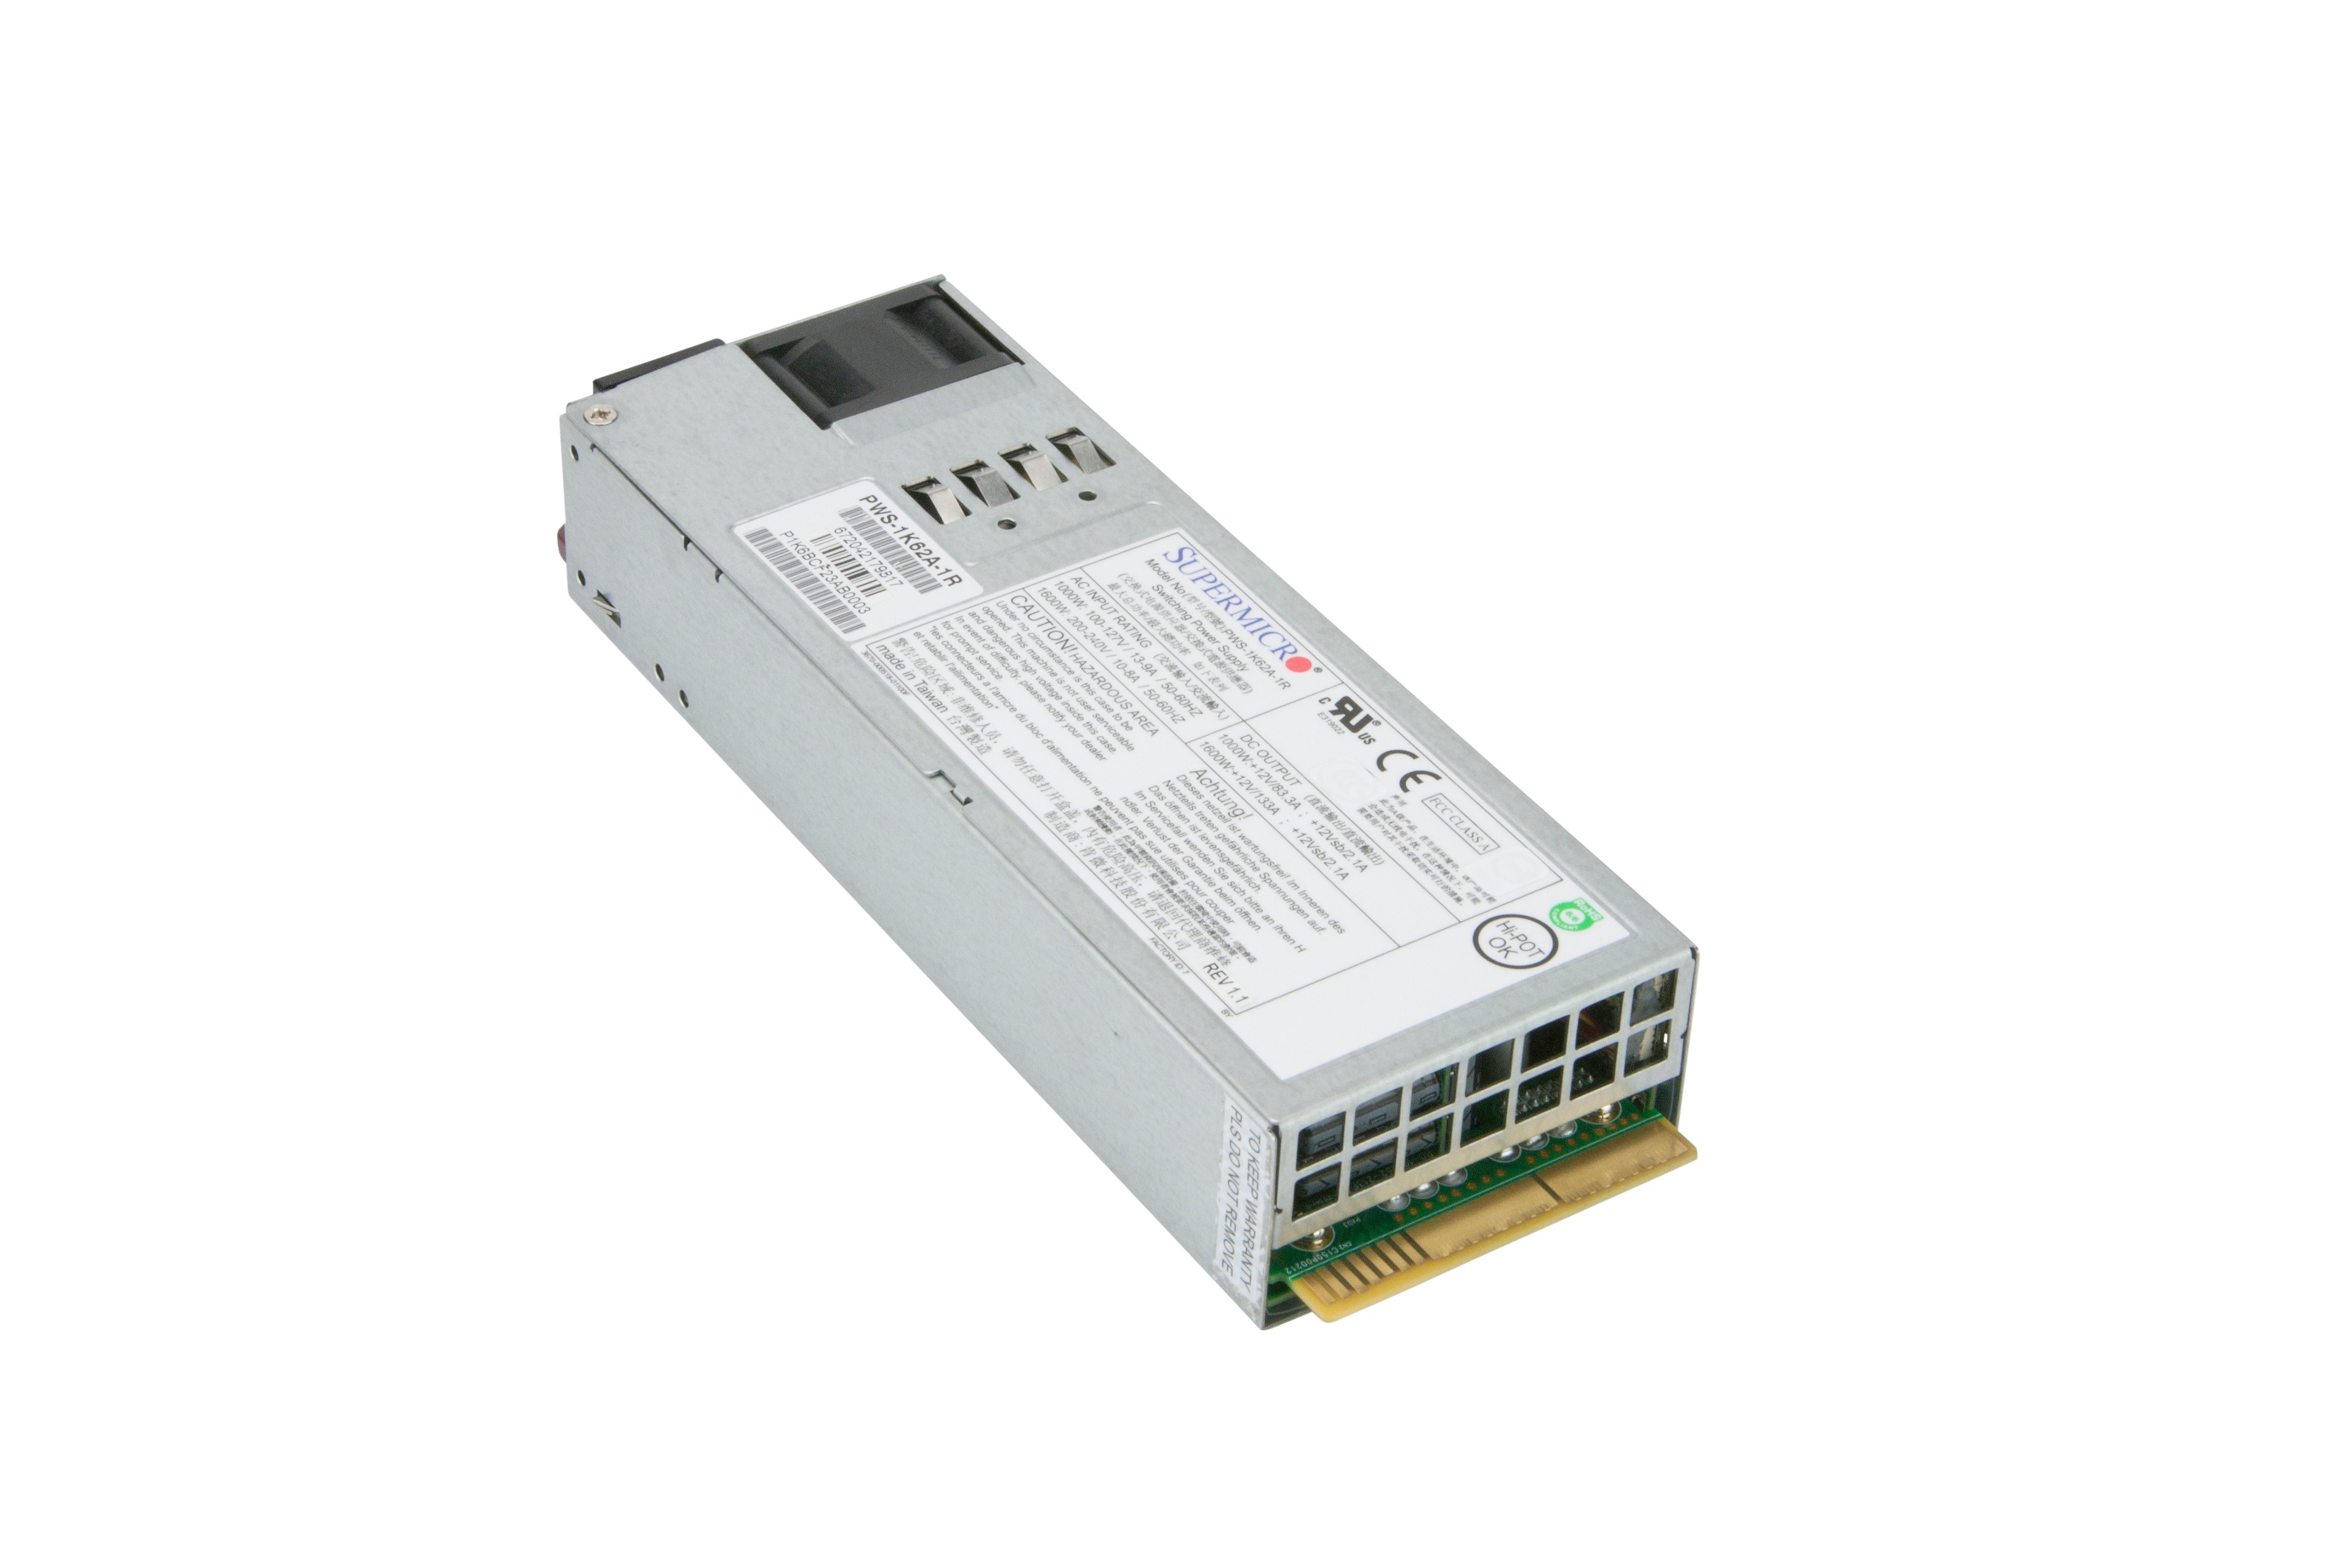 Supermicro Pws-1k41p-1r 1400w 80 Plus Gold Hot Swap Power Supply for sale online 